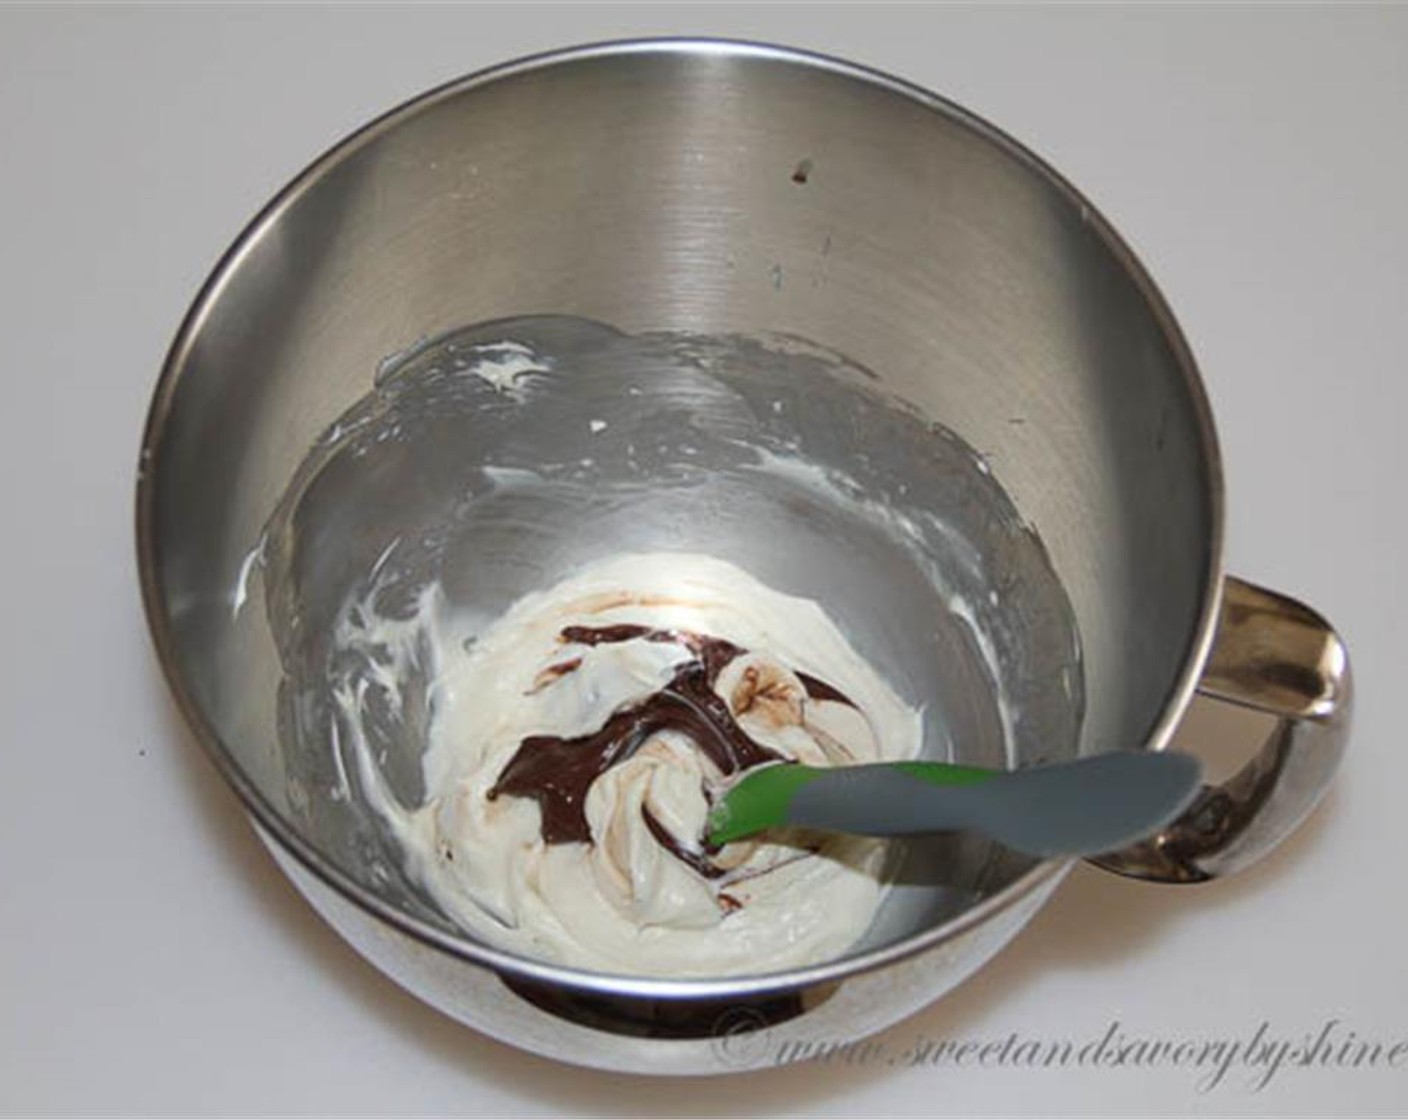 step 2 In a mixing bowl with a whisk attachment, beat the Philadelphia Original Soft Cheese (1/2 cup), Sweetened Condensed Milk (1/4 cup) and Vanilla Extract (1/2 tsp) together until well combined. Swirl Nutella® (2 Tbsp) in to bowl to mix throughout.